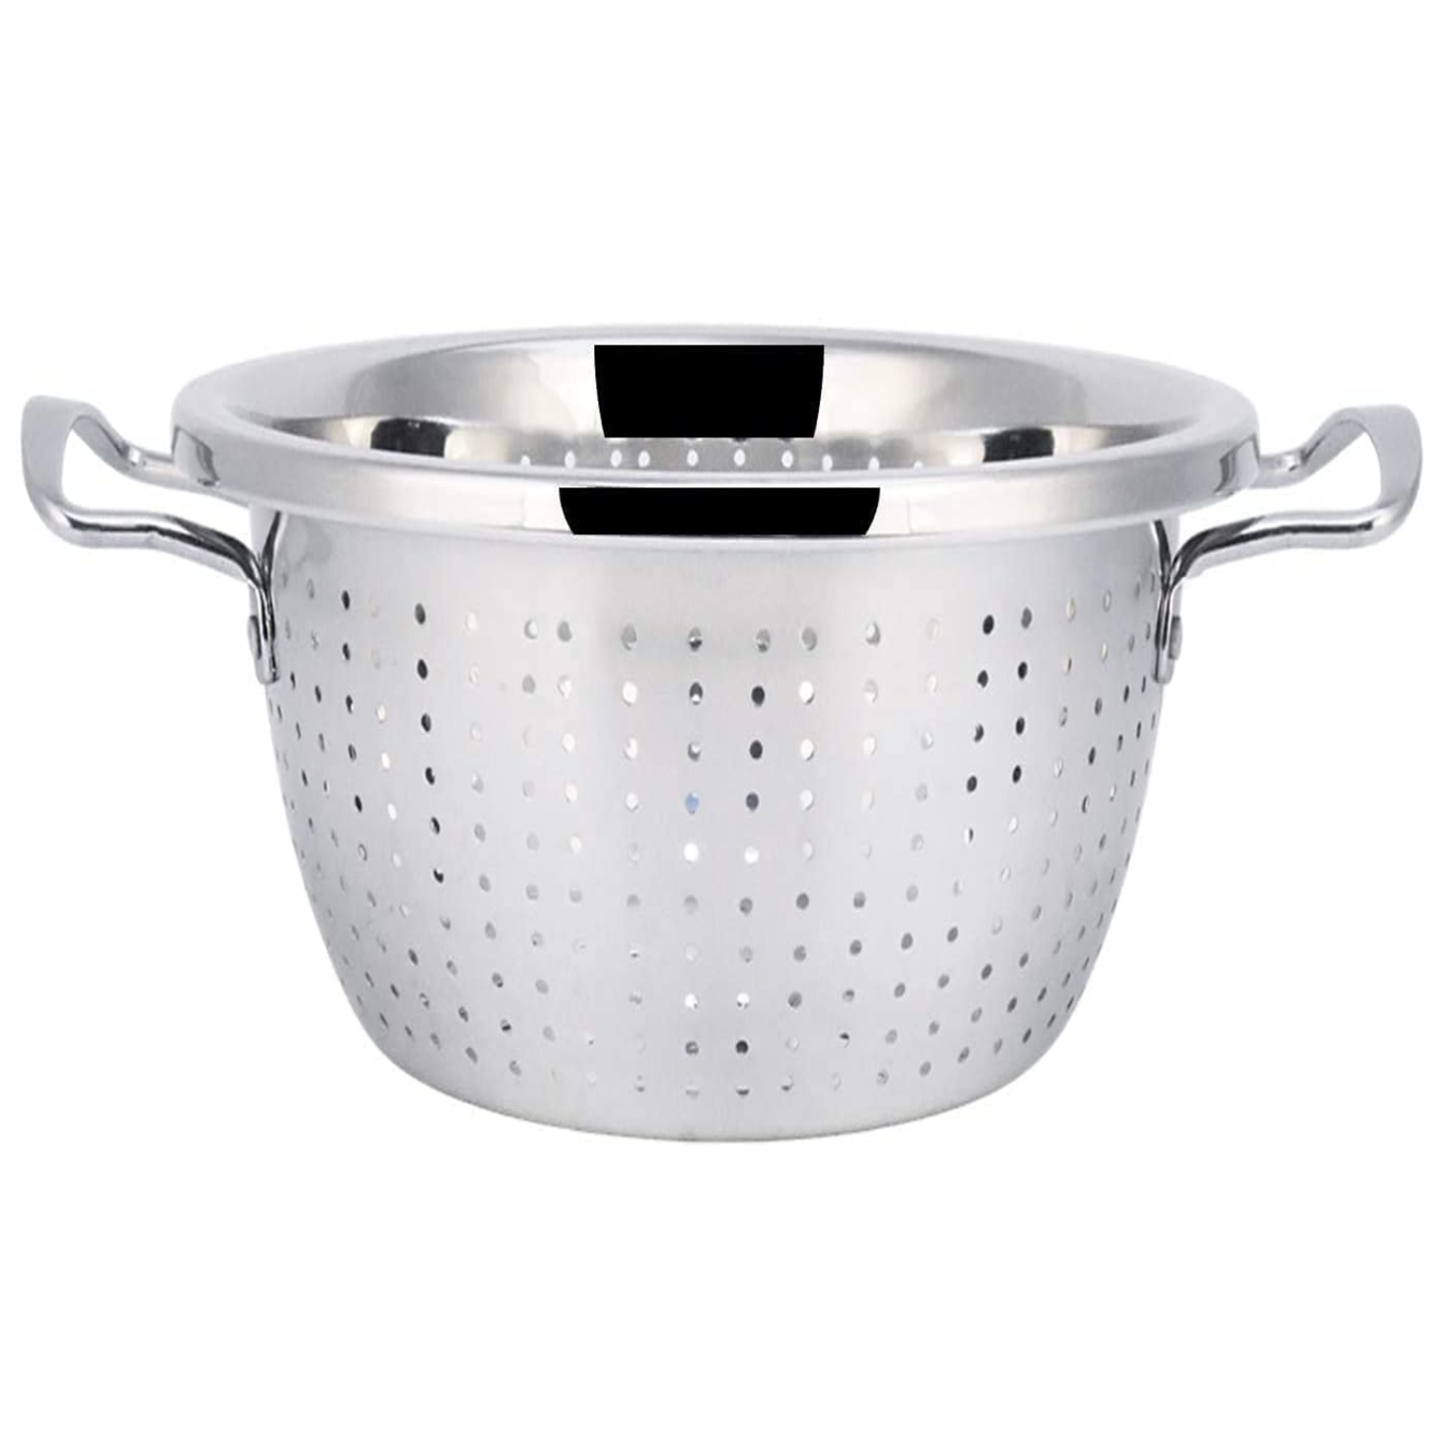 28cm Stainless Steel Tall Colander